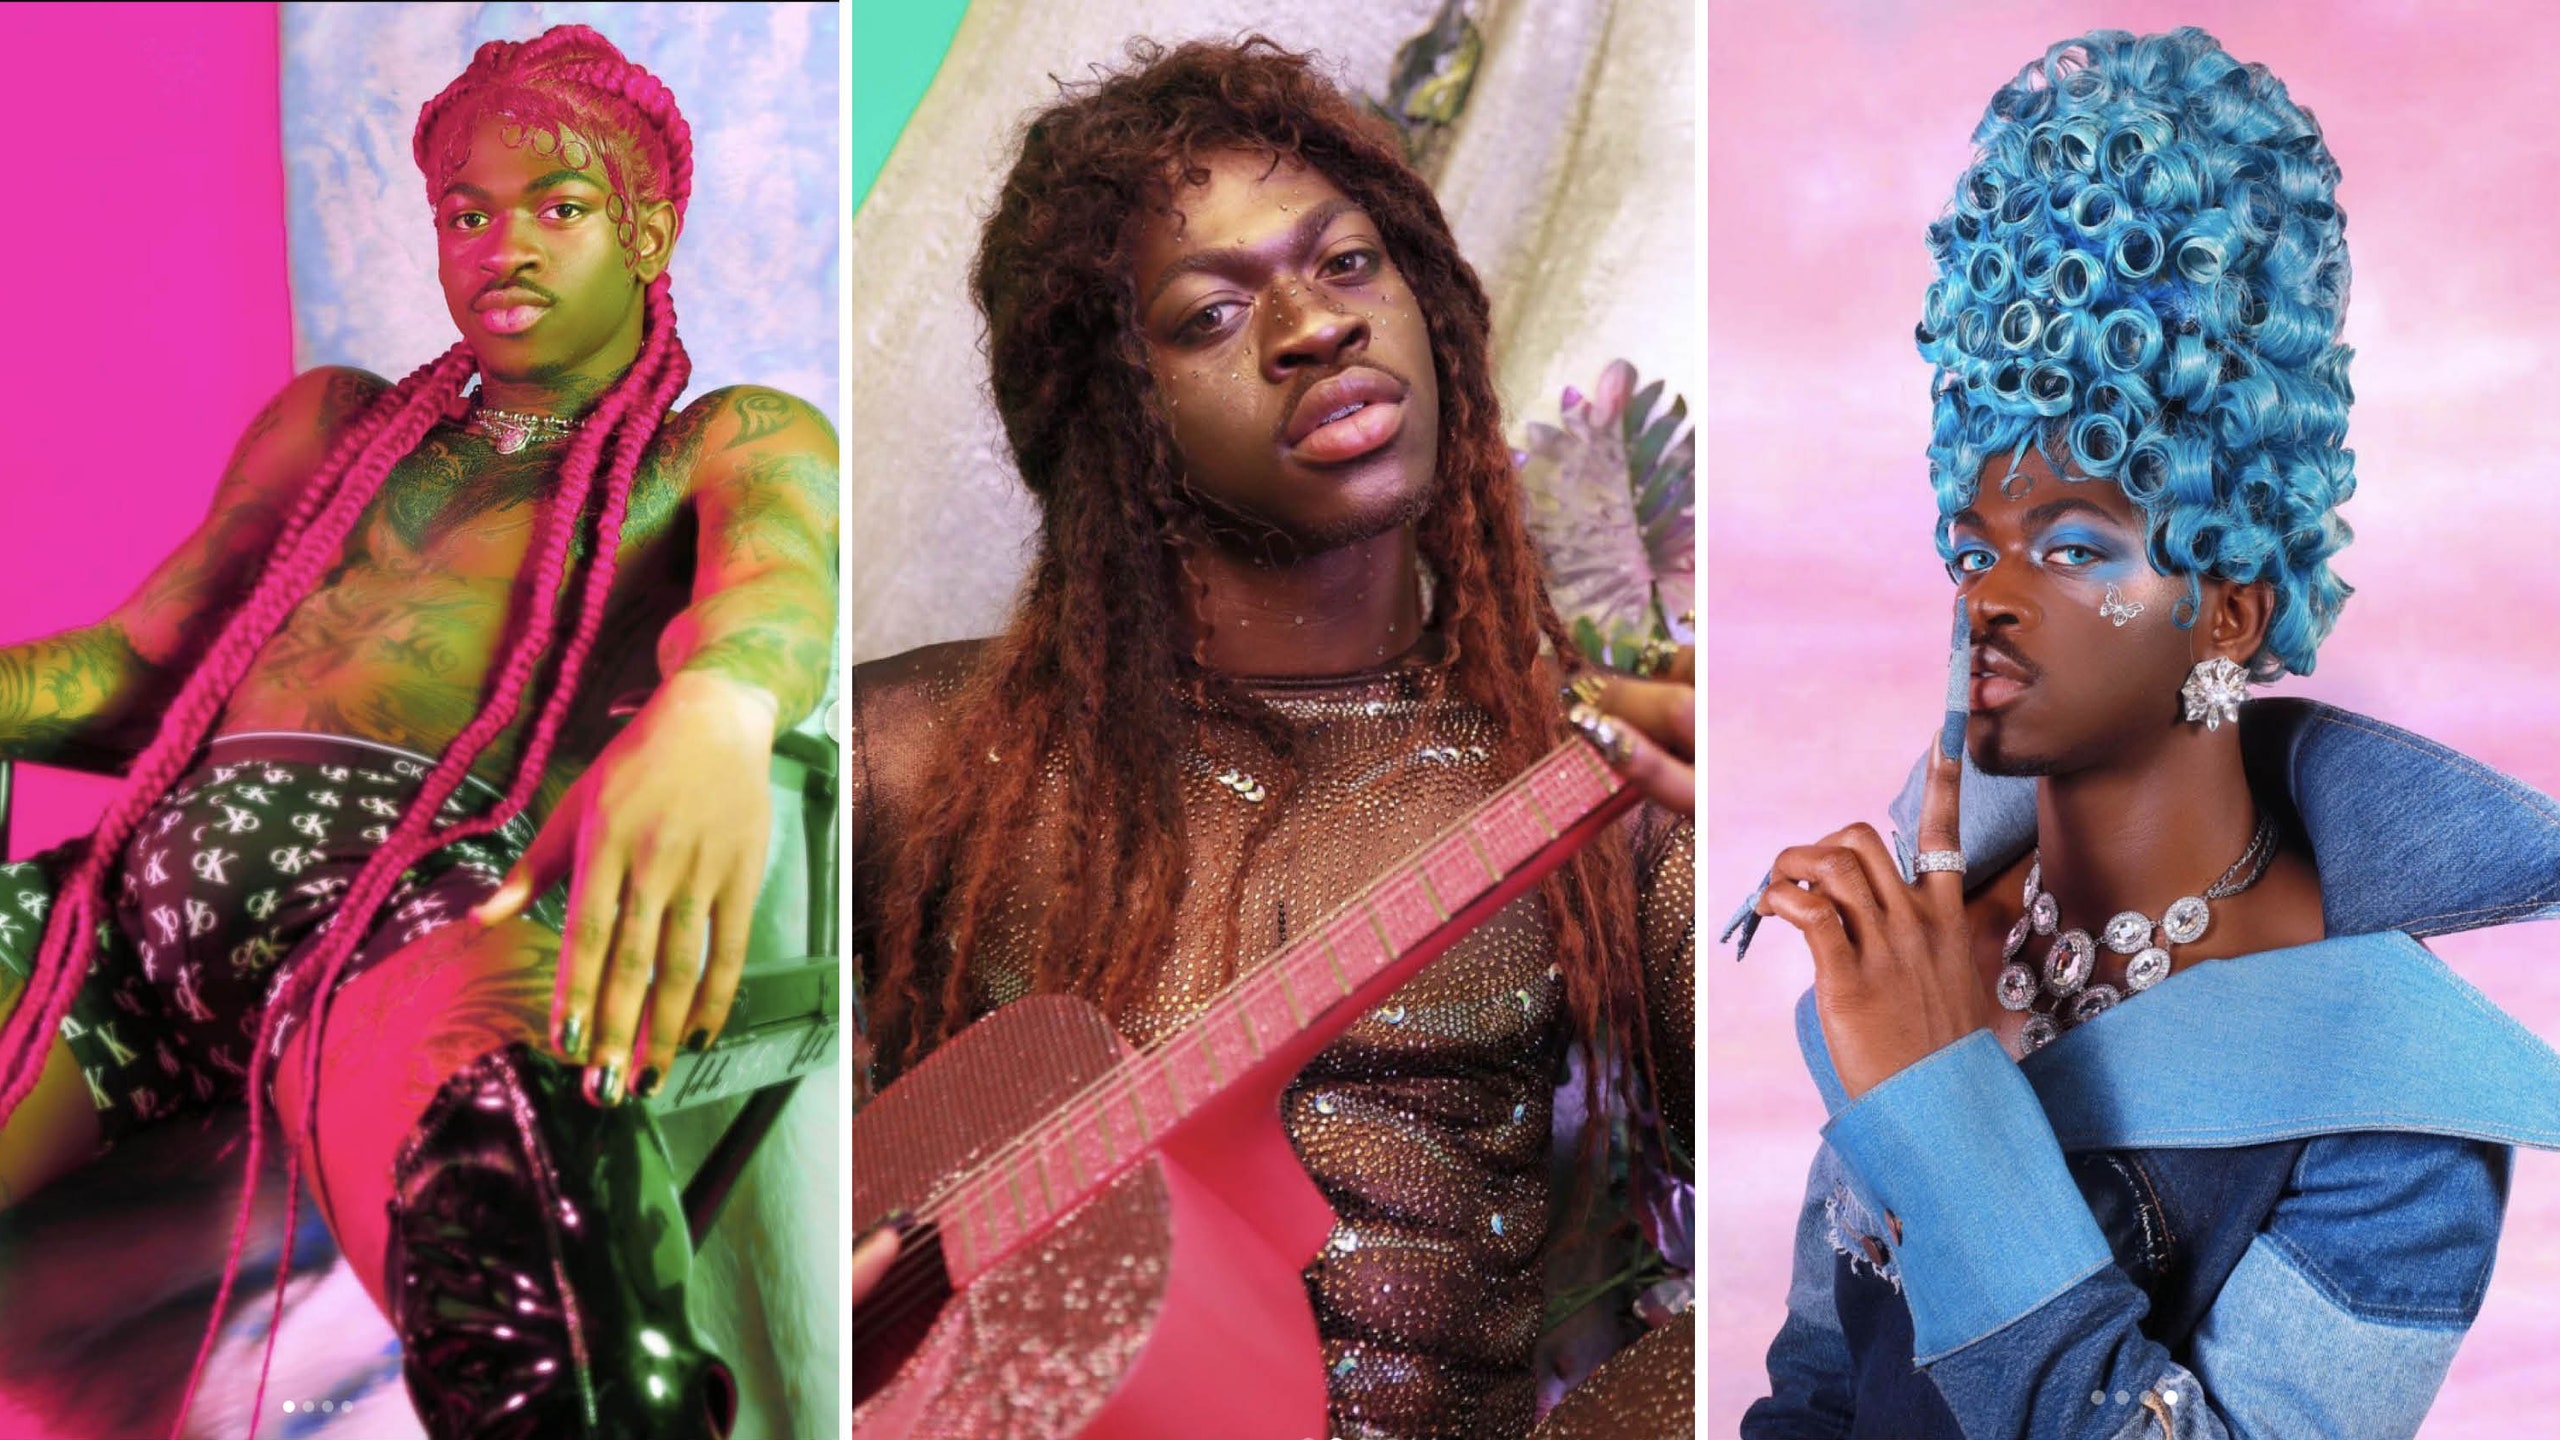 Lil Nas X’s Controversial ‘Montero’ Debuts At #1 On Billboard Hot 100, Becoming His Second #1